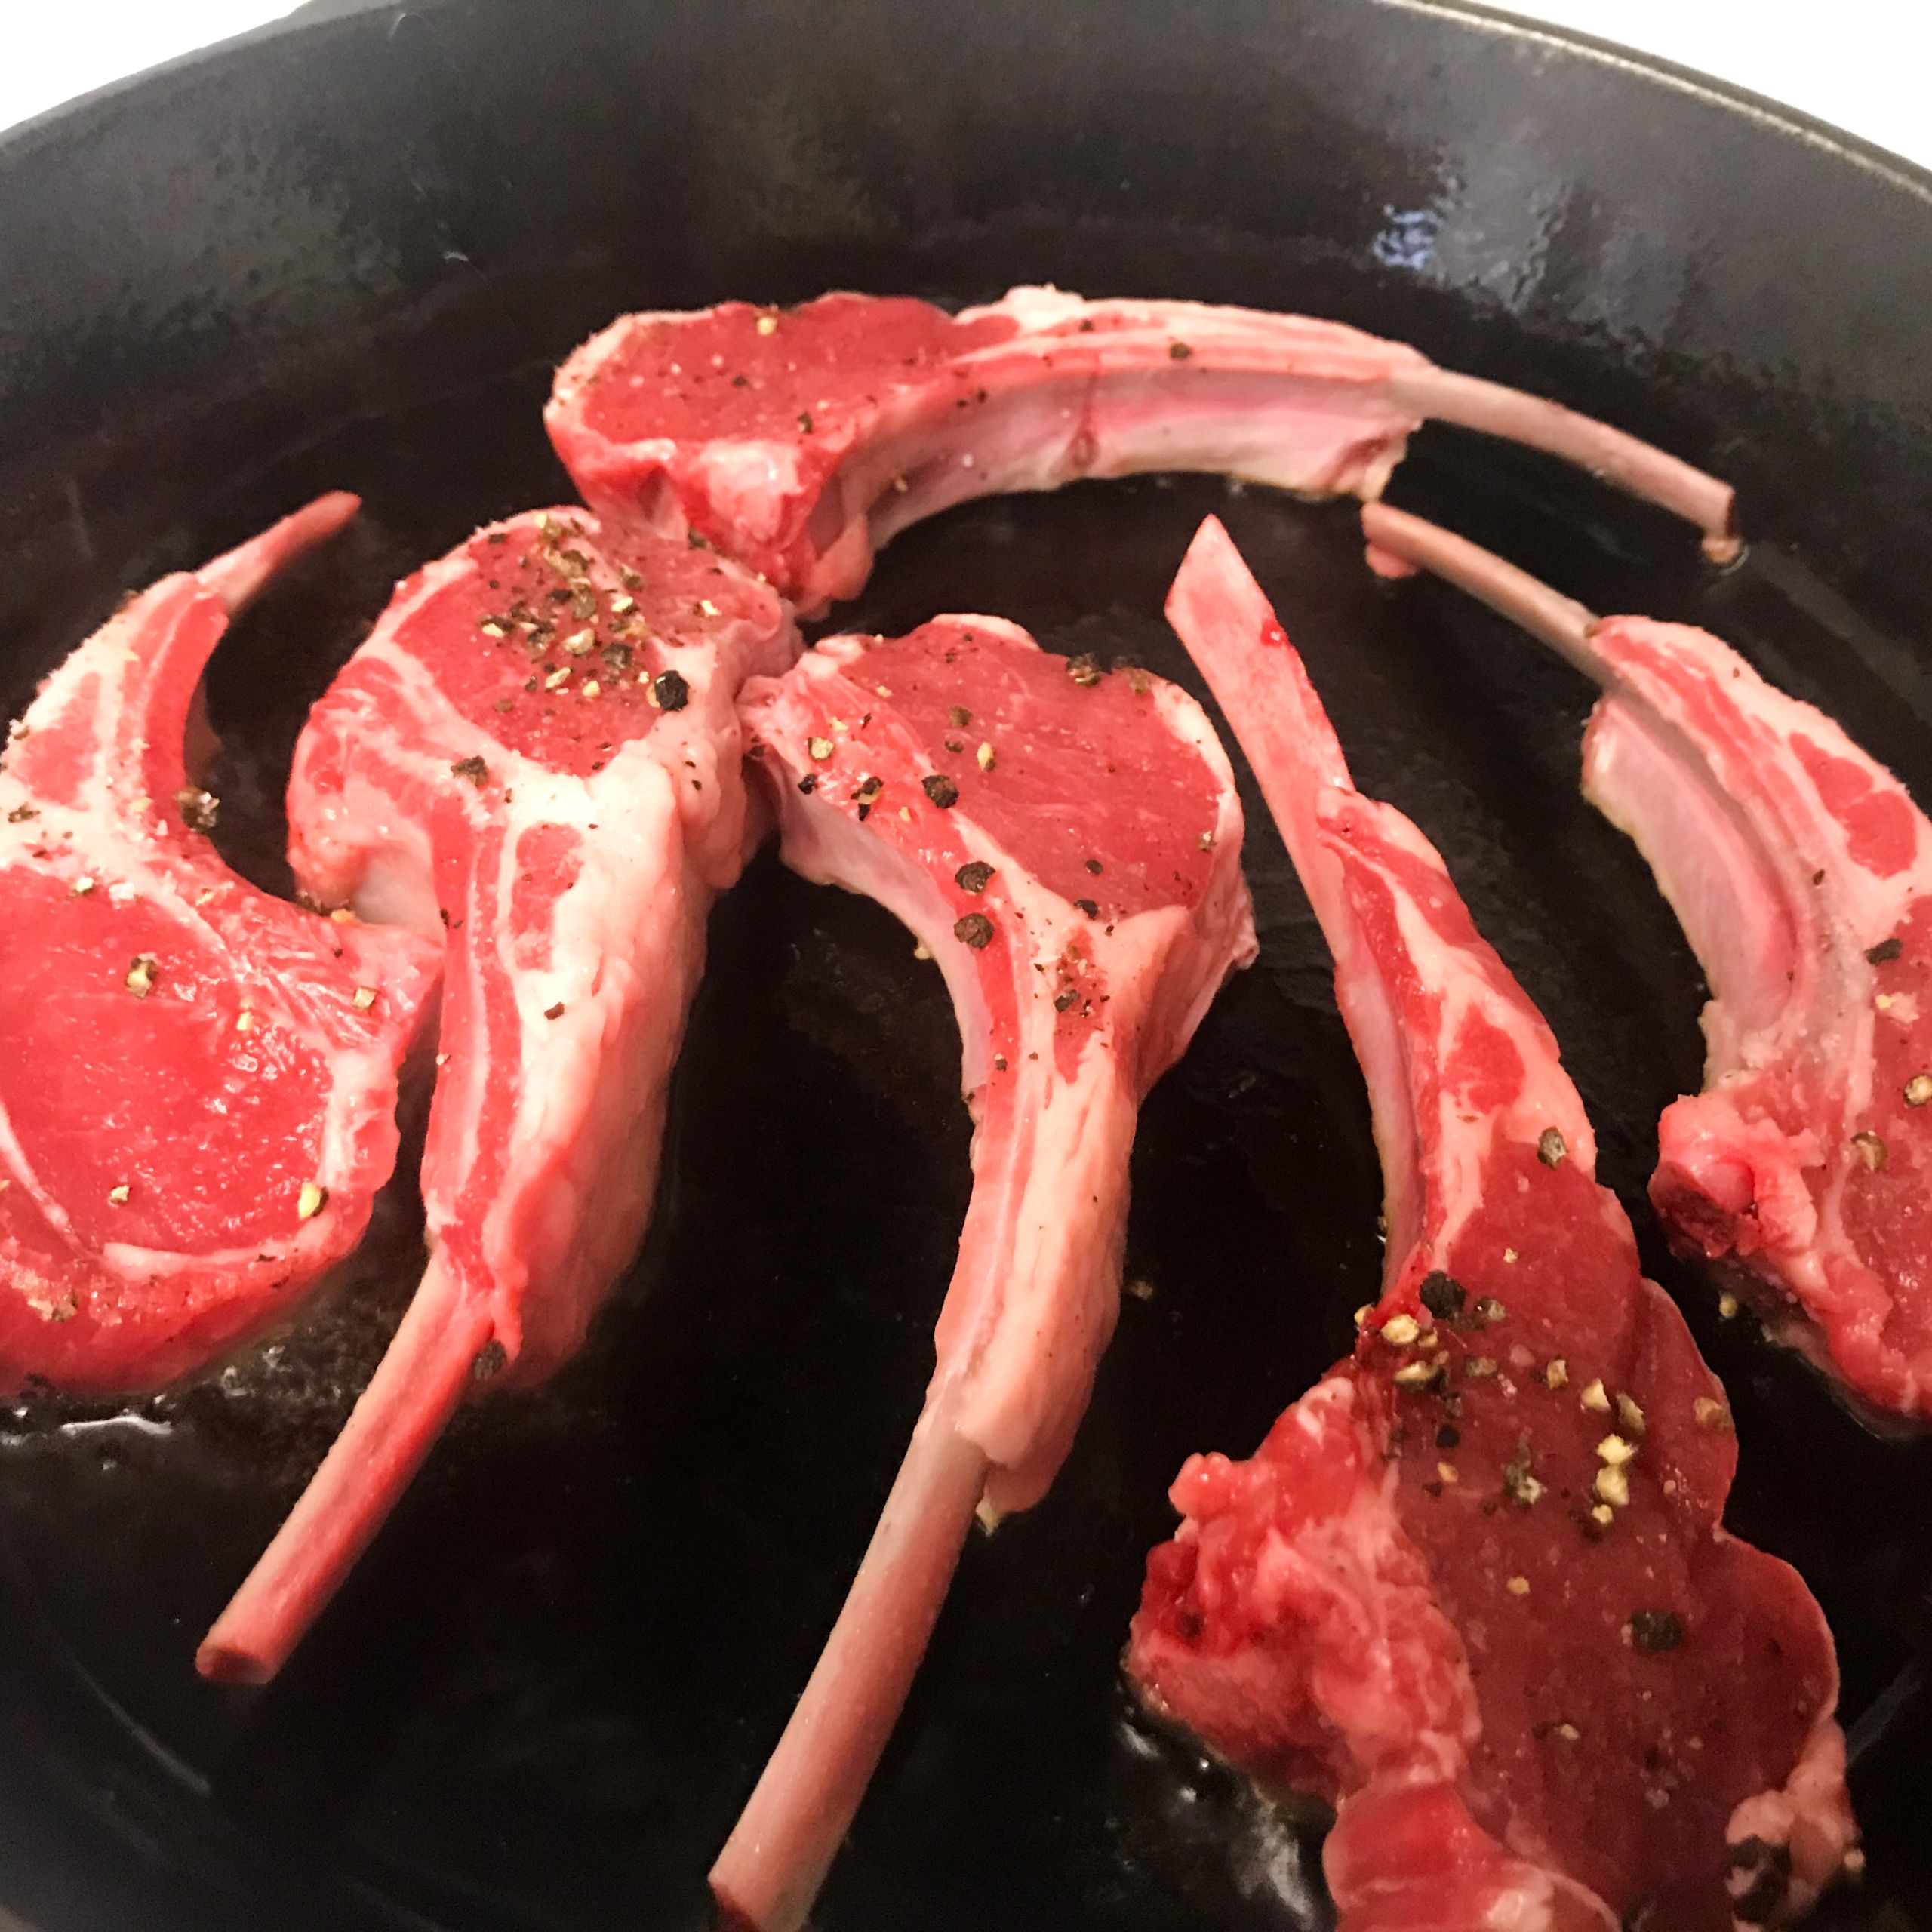 LAMB CHOPS IN SKILLET | MY CURATED TASTES